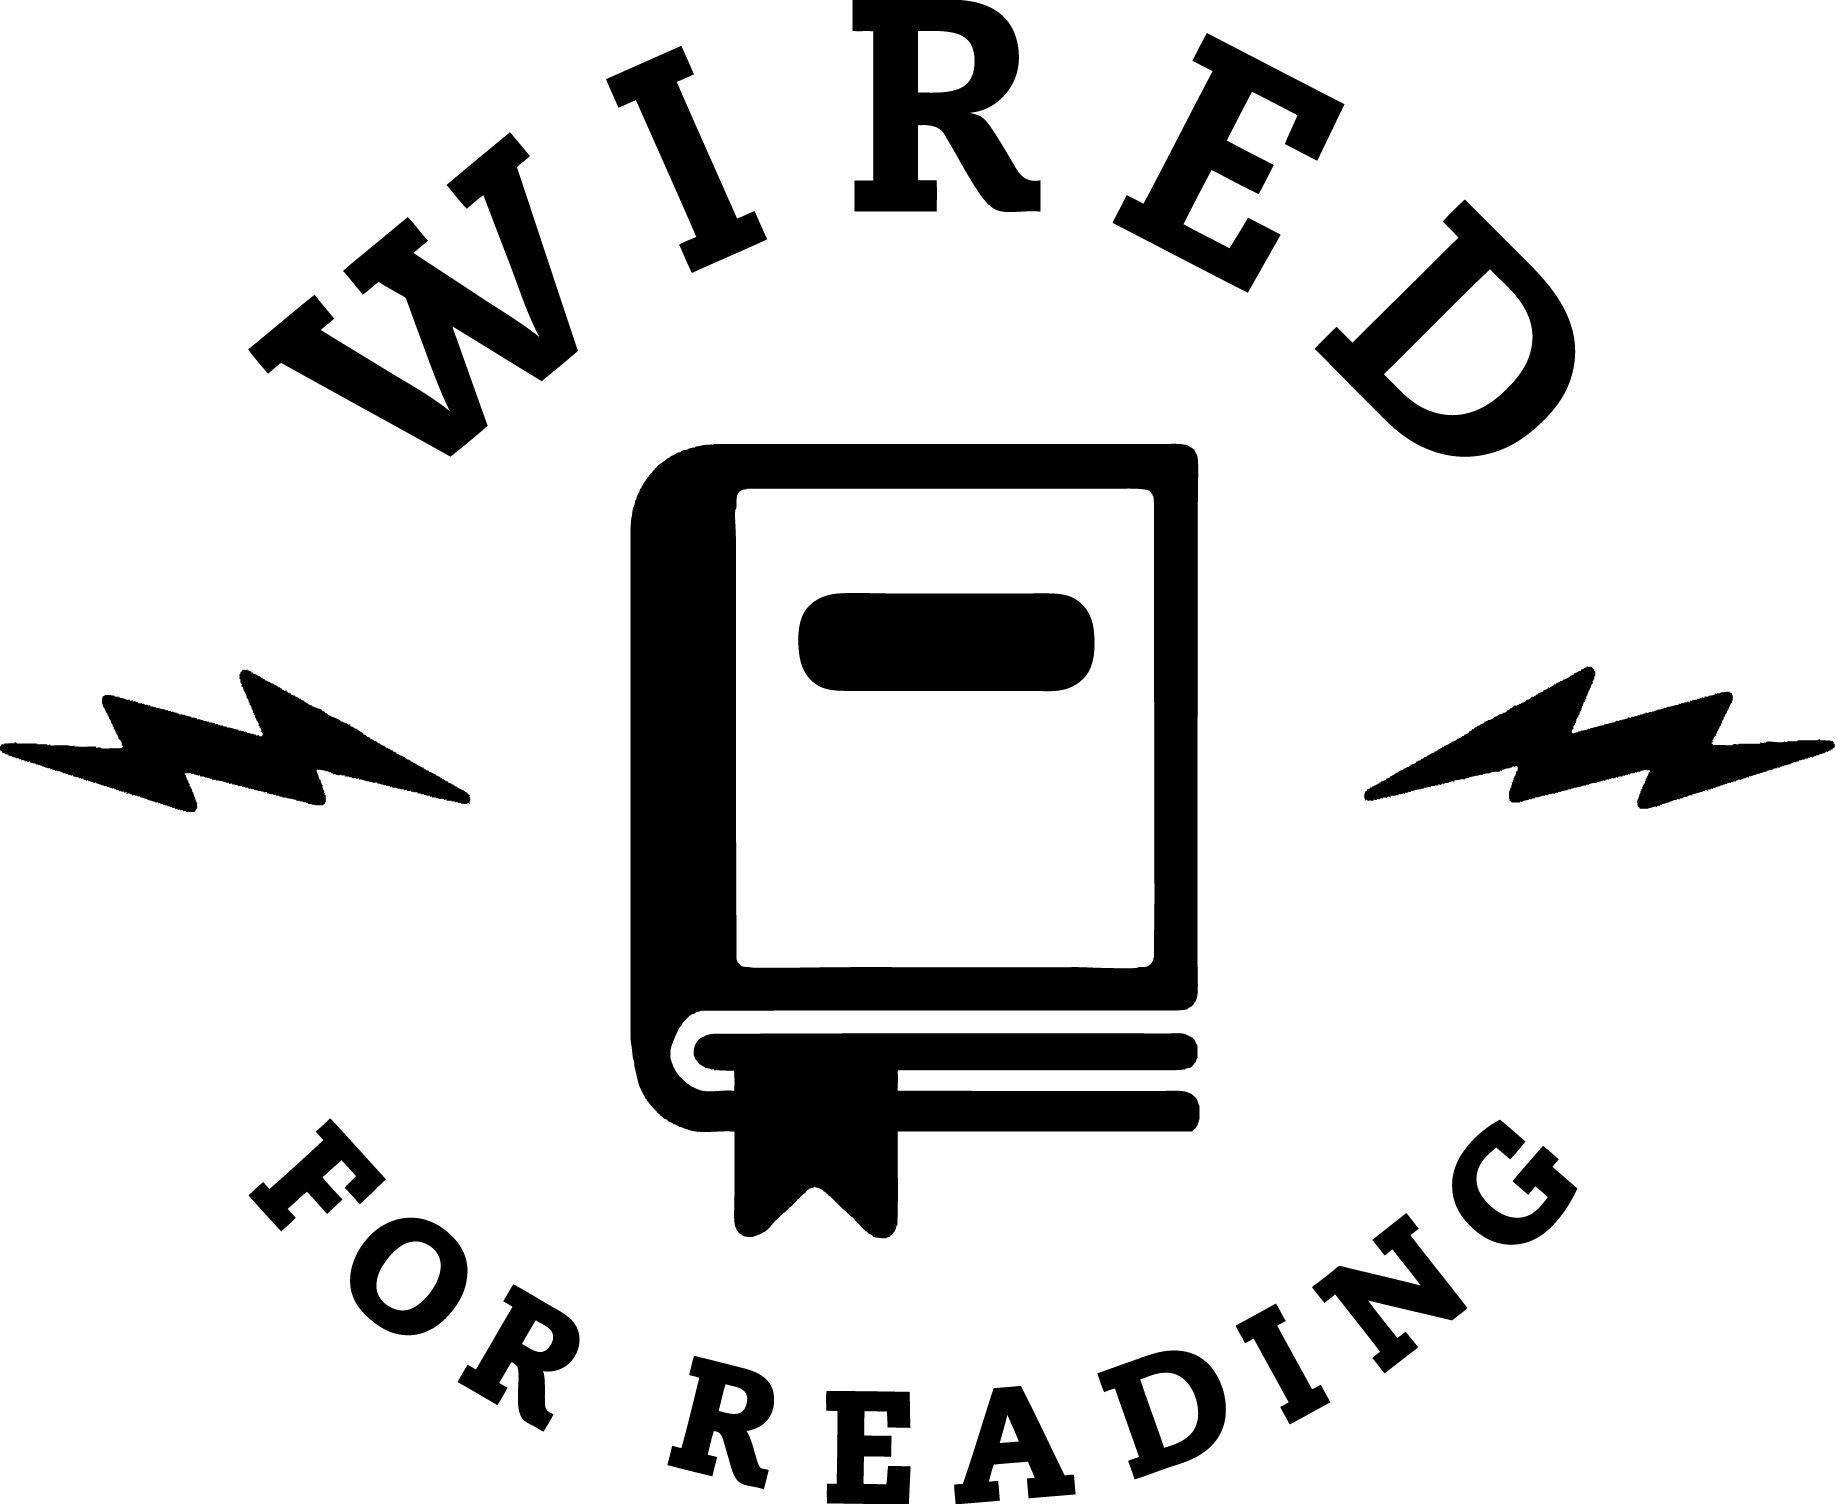 WFR Logo - Wired for Reading